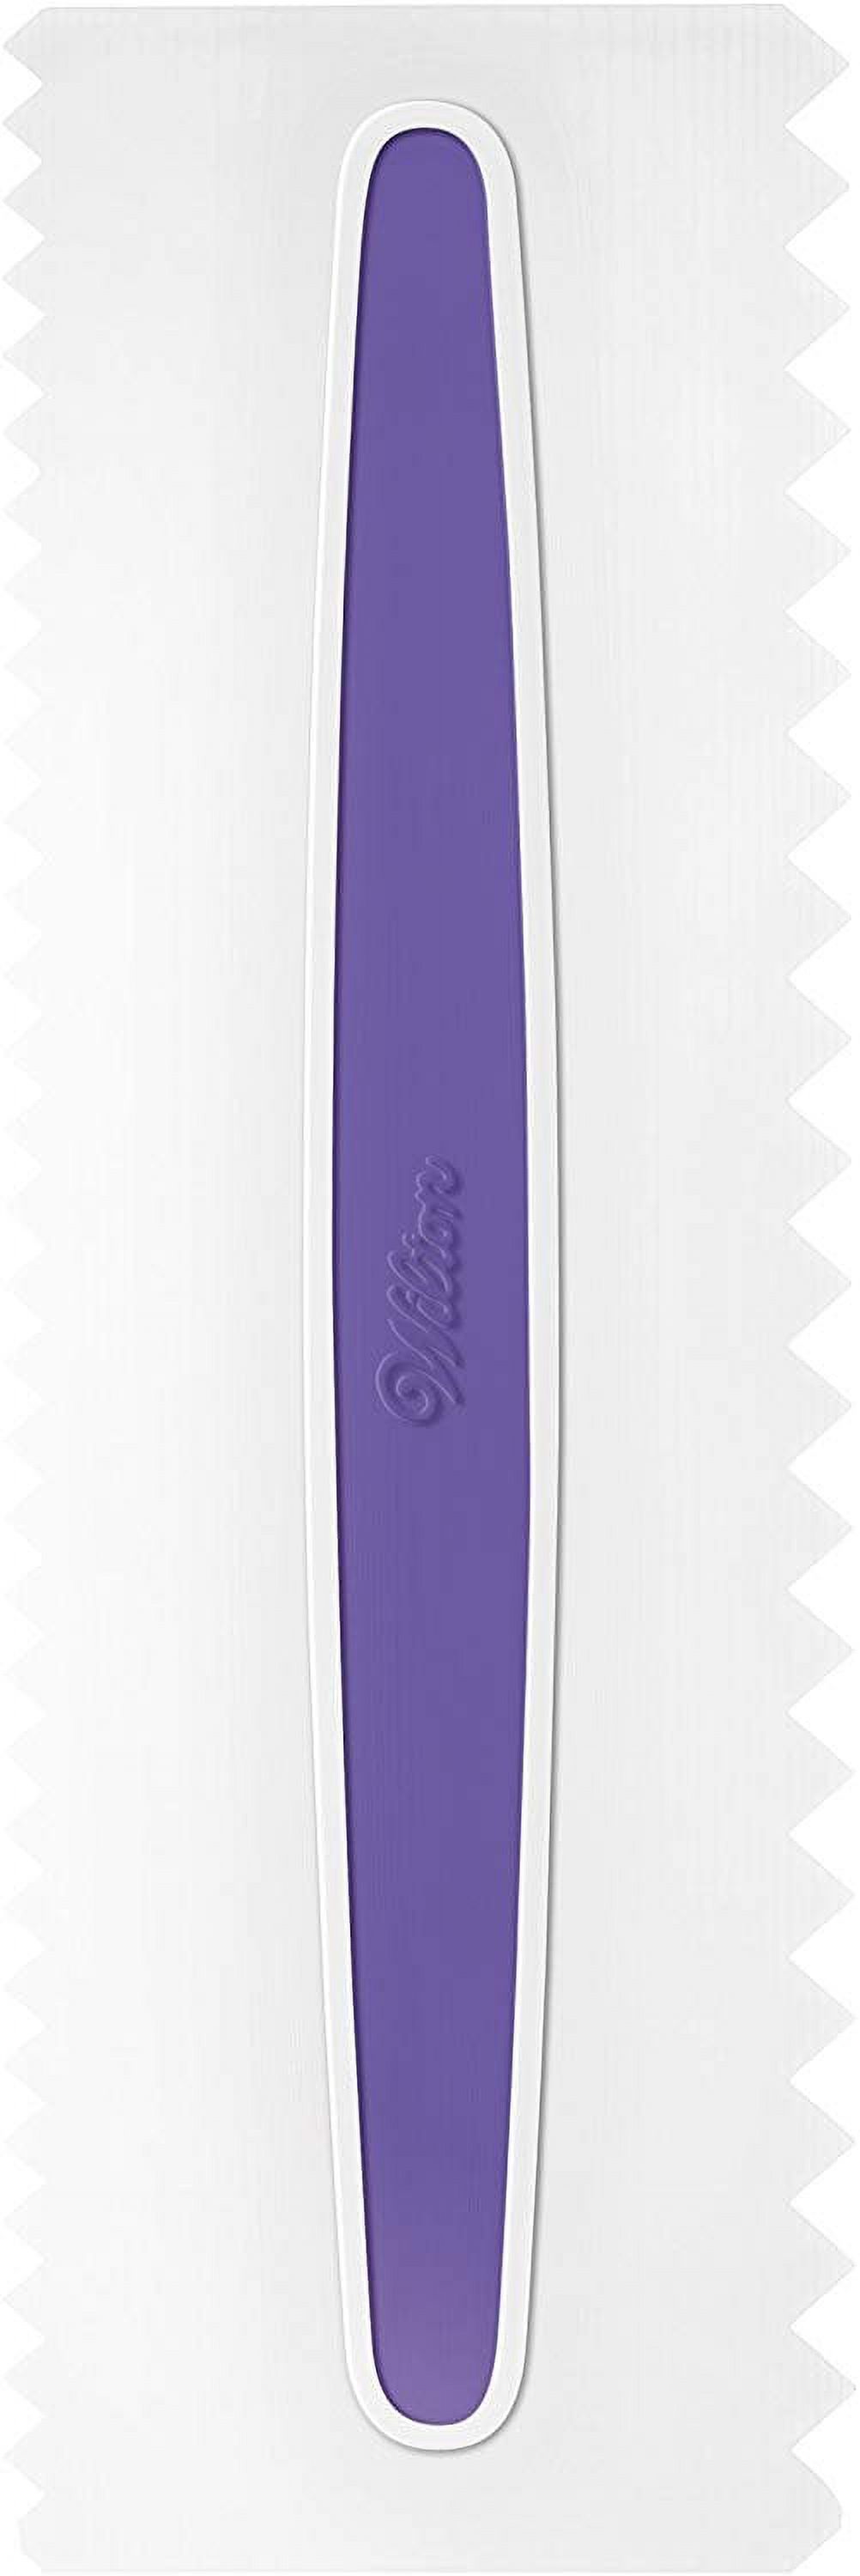 Wilton Icing Smoother Comb Set, 3-Piece Adaptable Model - image 5 of 16